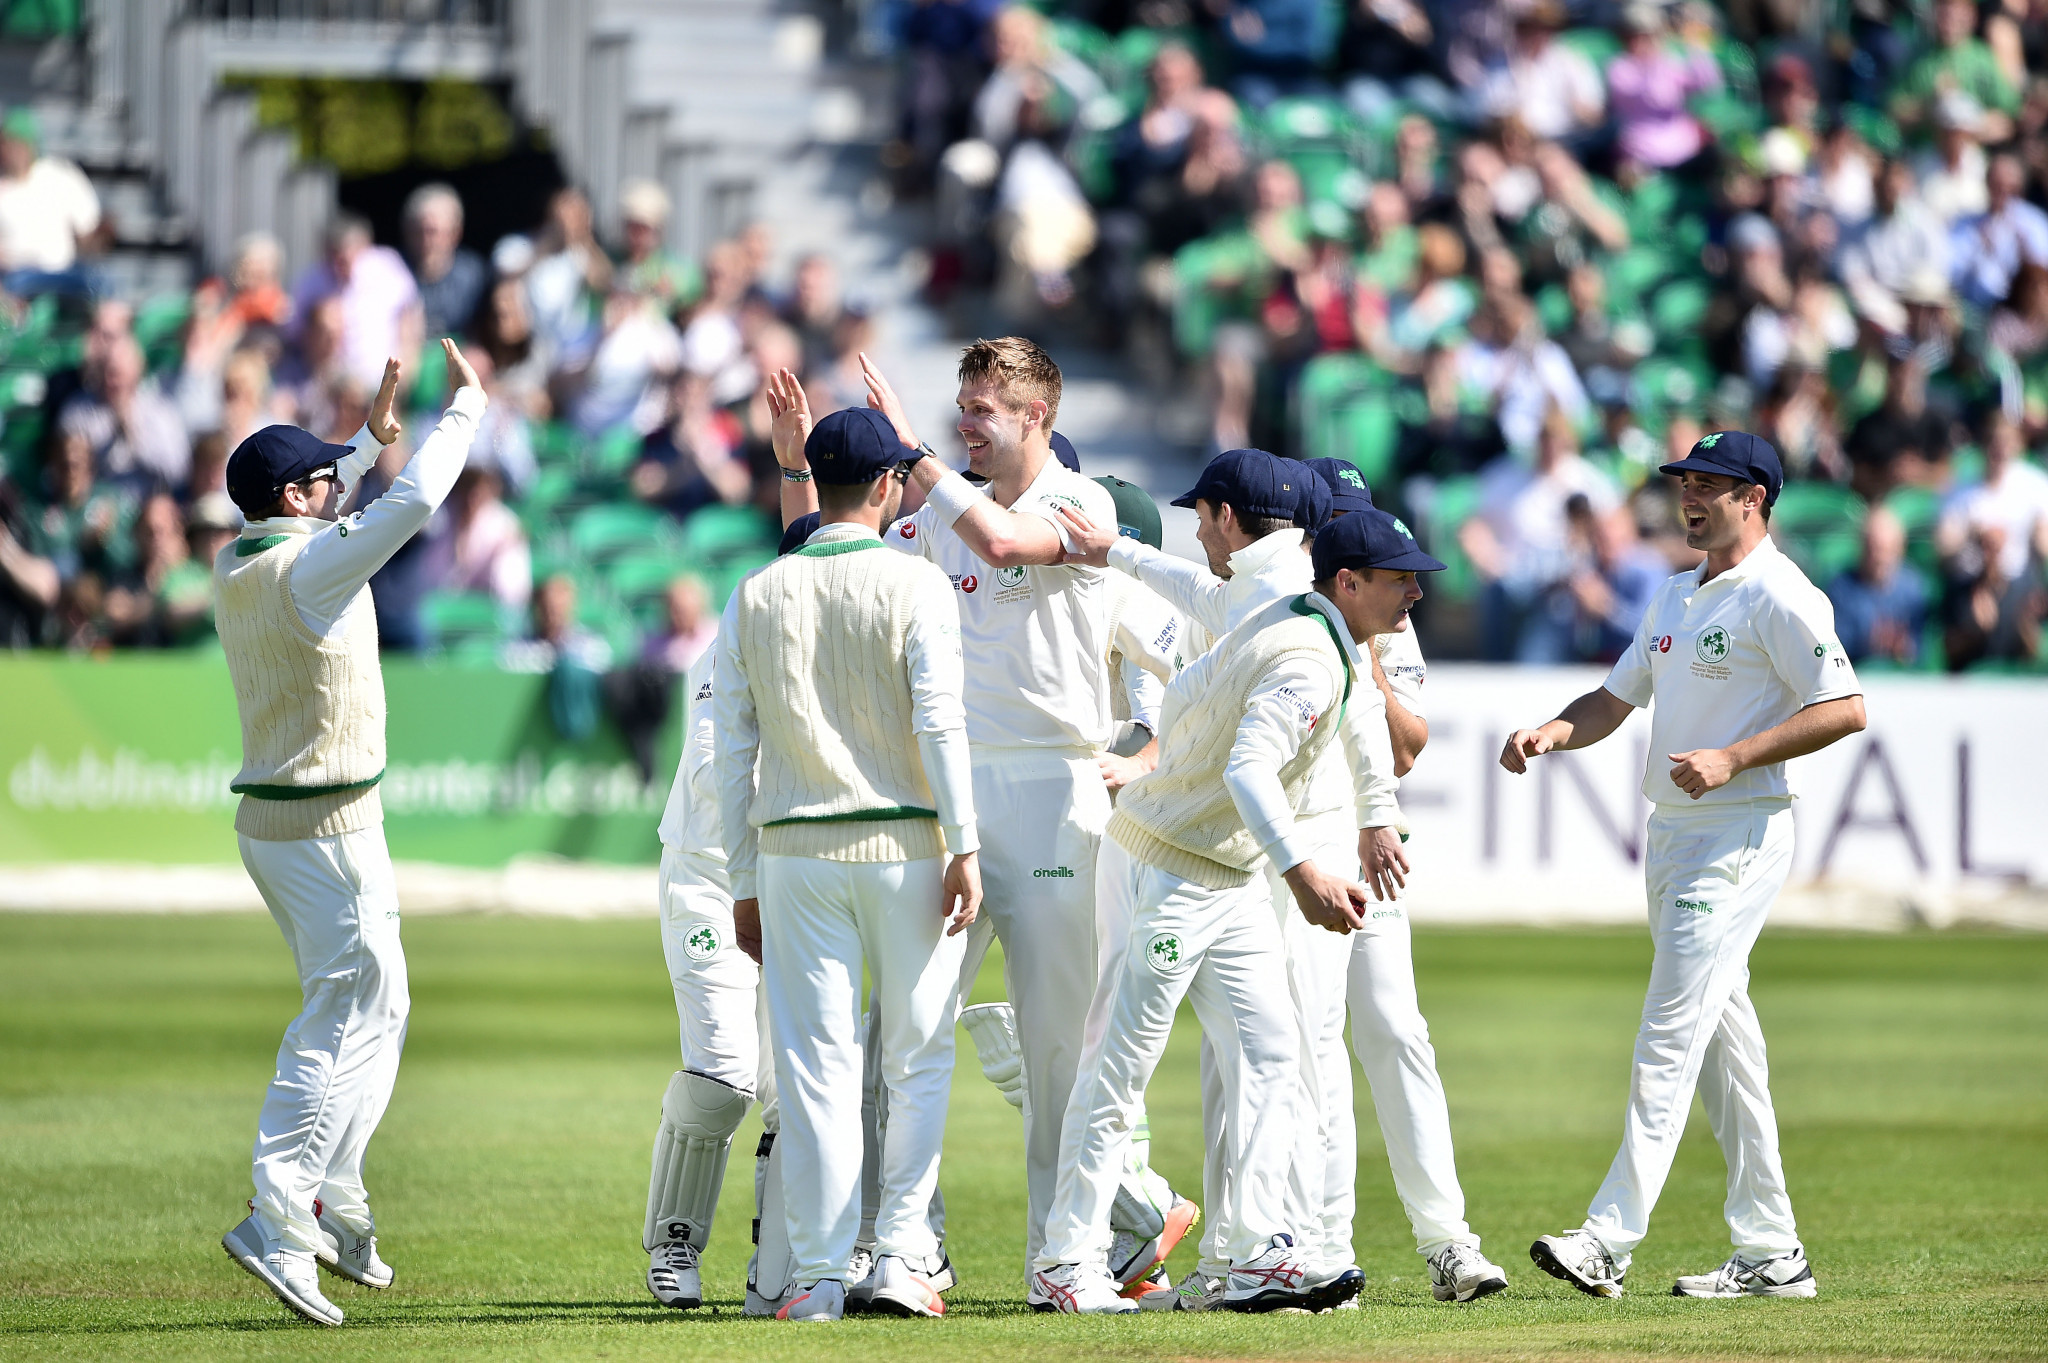 Ireland finally make Test debut after opening day washout against Pakistan